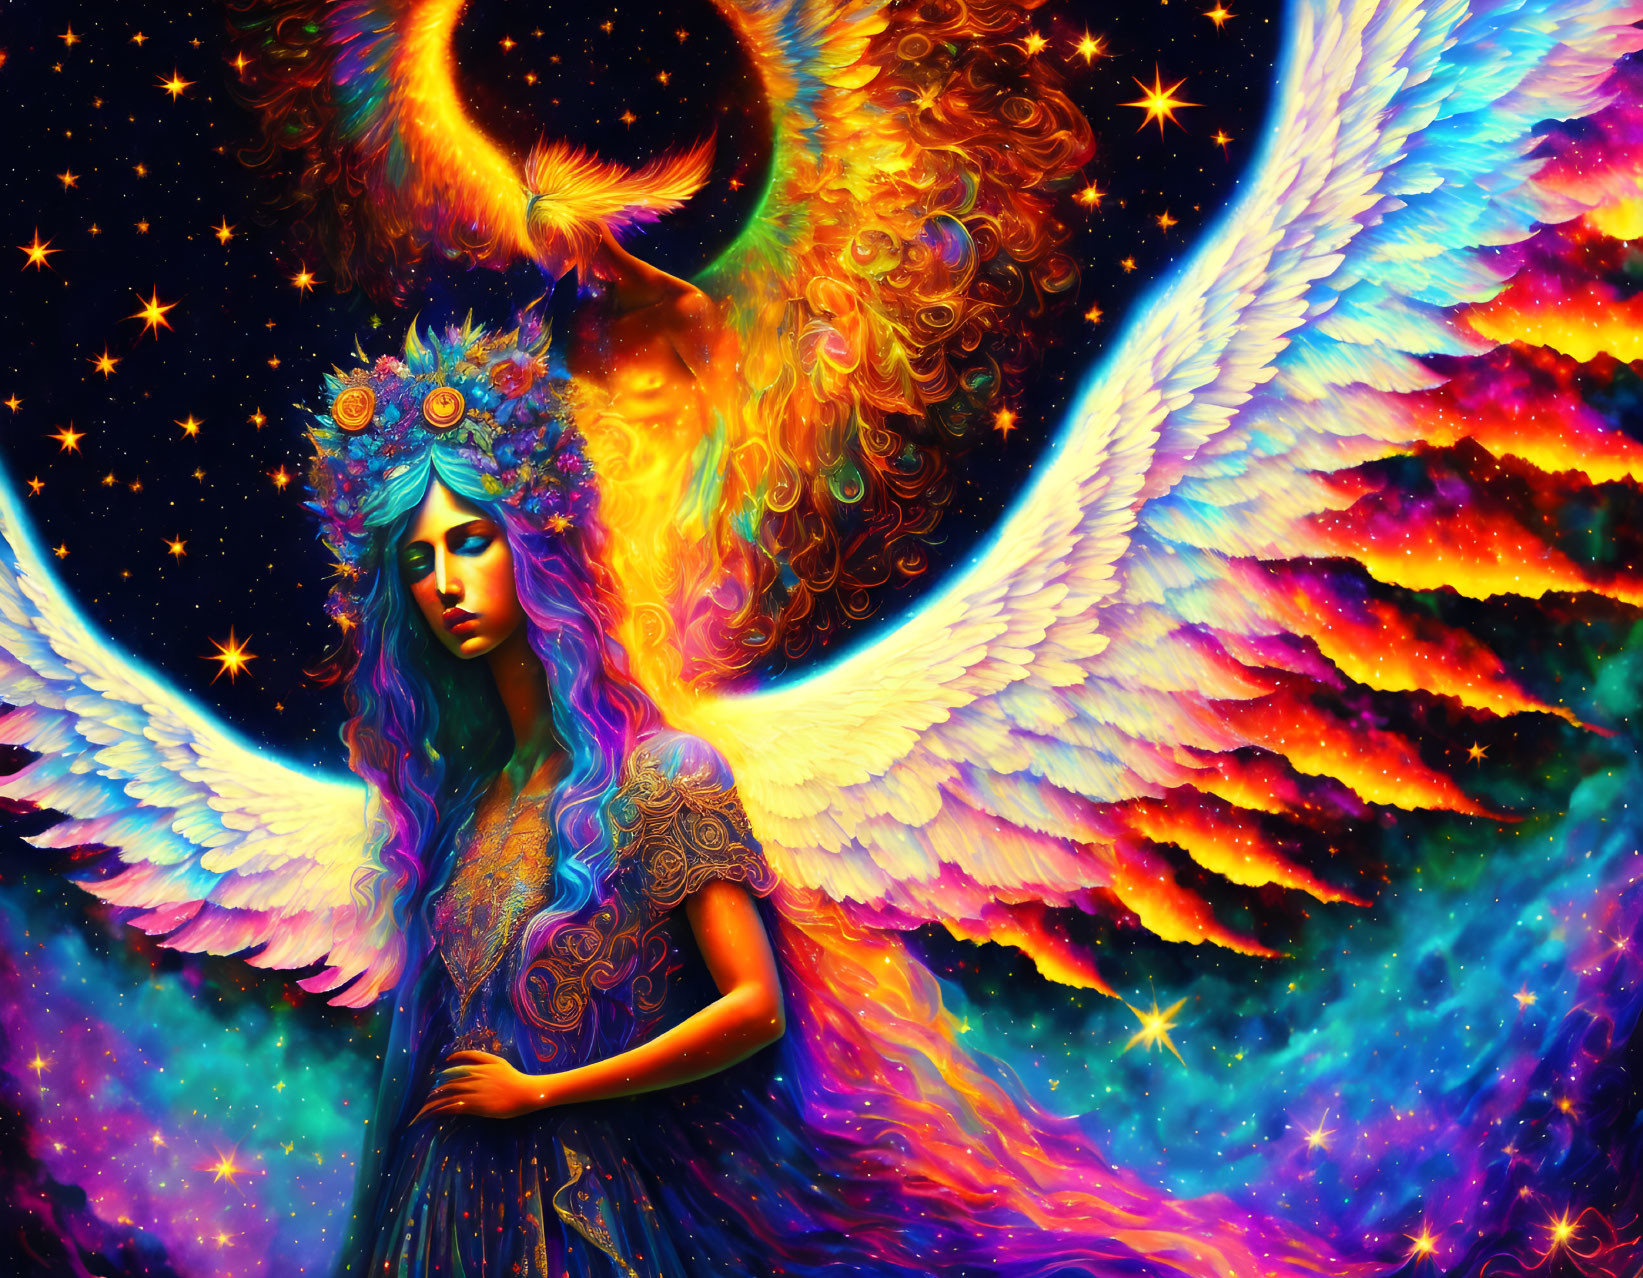 Ethereal winged woman with blue hair in cosmic scene